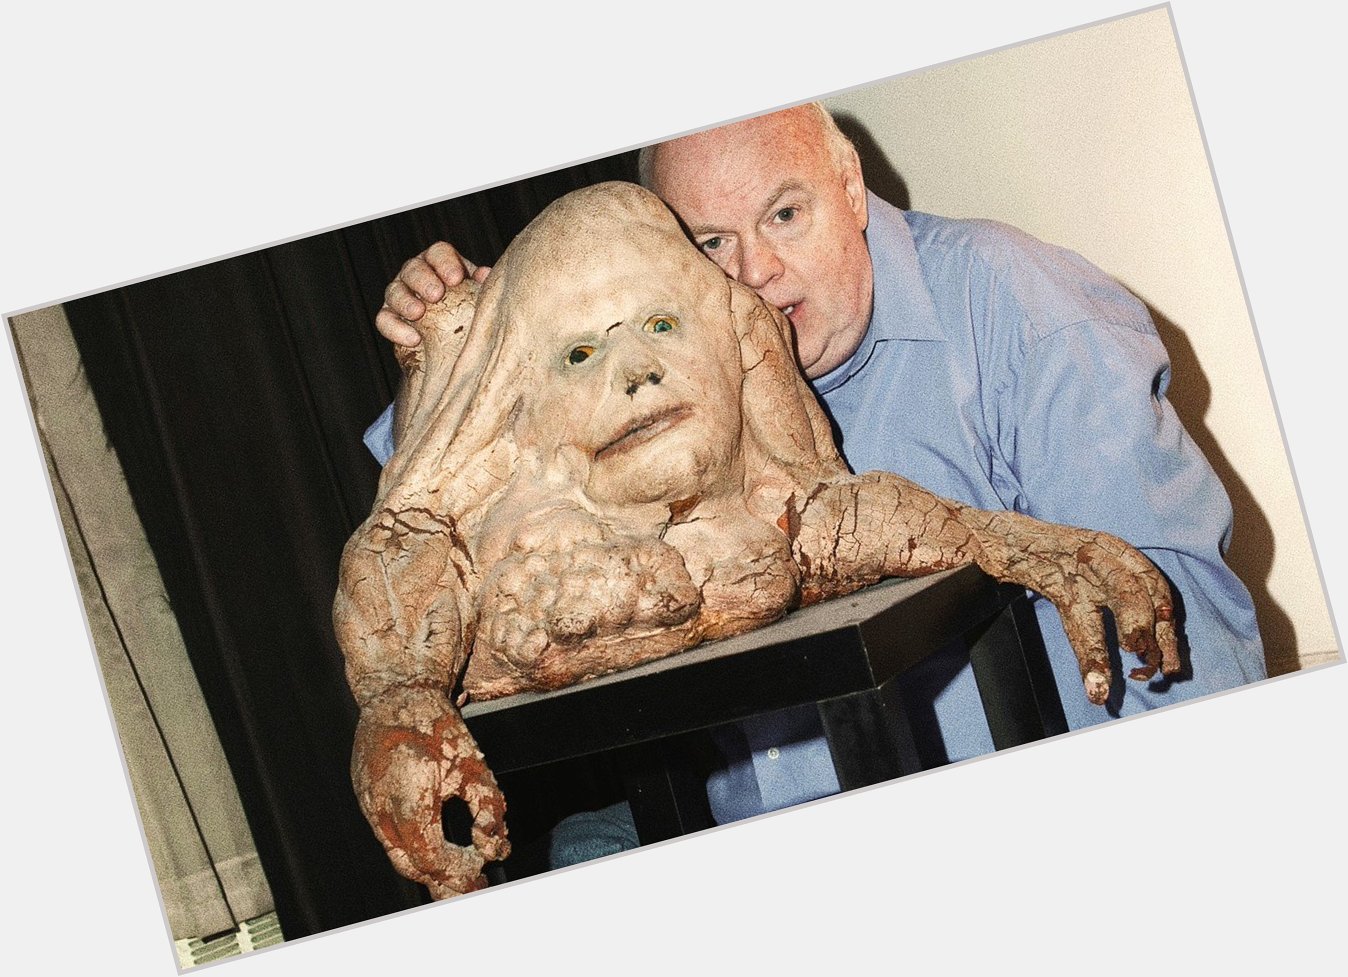 Happy Birthday Frank Henenlotter! 

Celebrate with the always awesome BASKET CASE:  